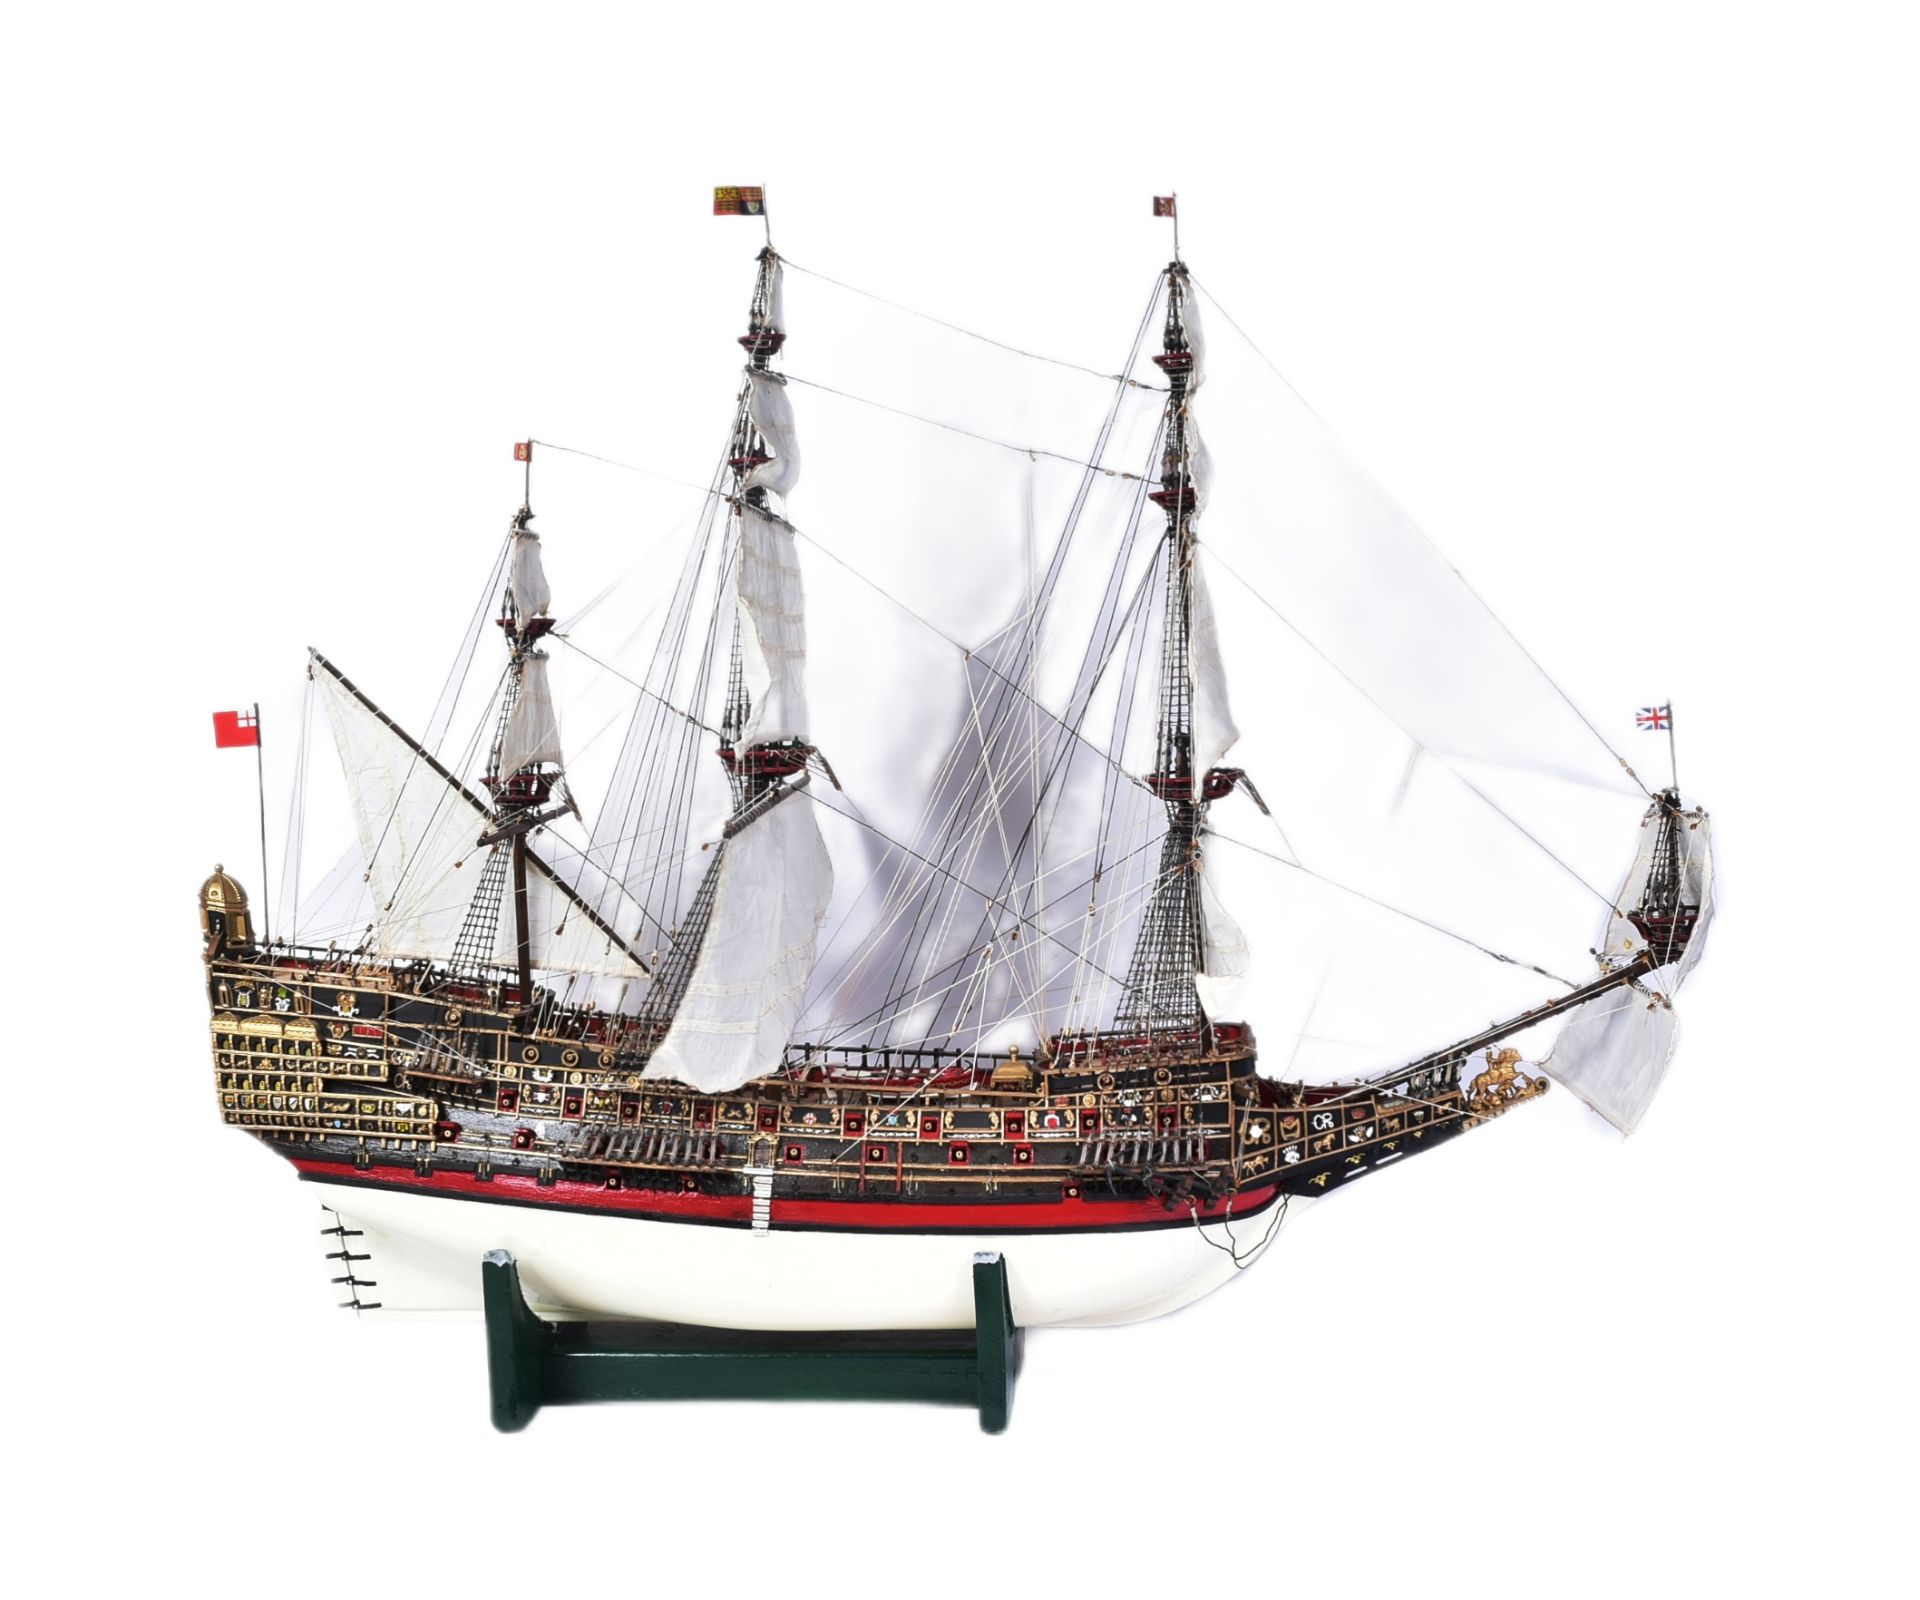 HMS SOVEREIGN OF THE SEAS - MUSEUM QUALITY SCRATCH BUILT WOODEN MODEL